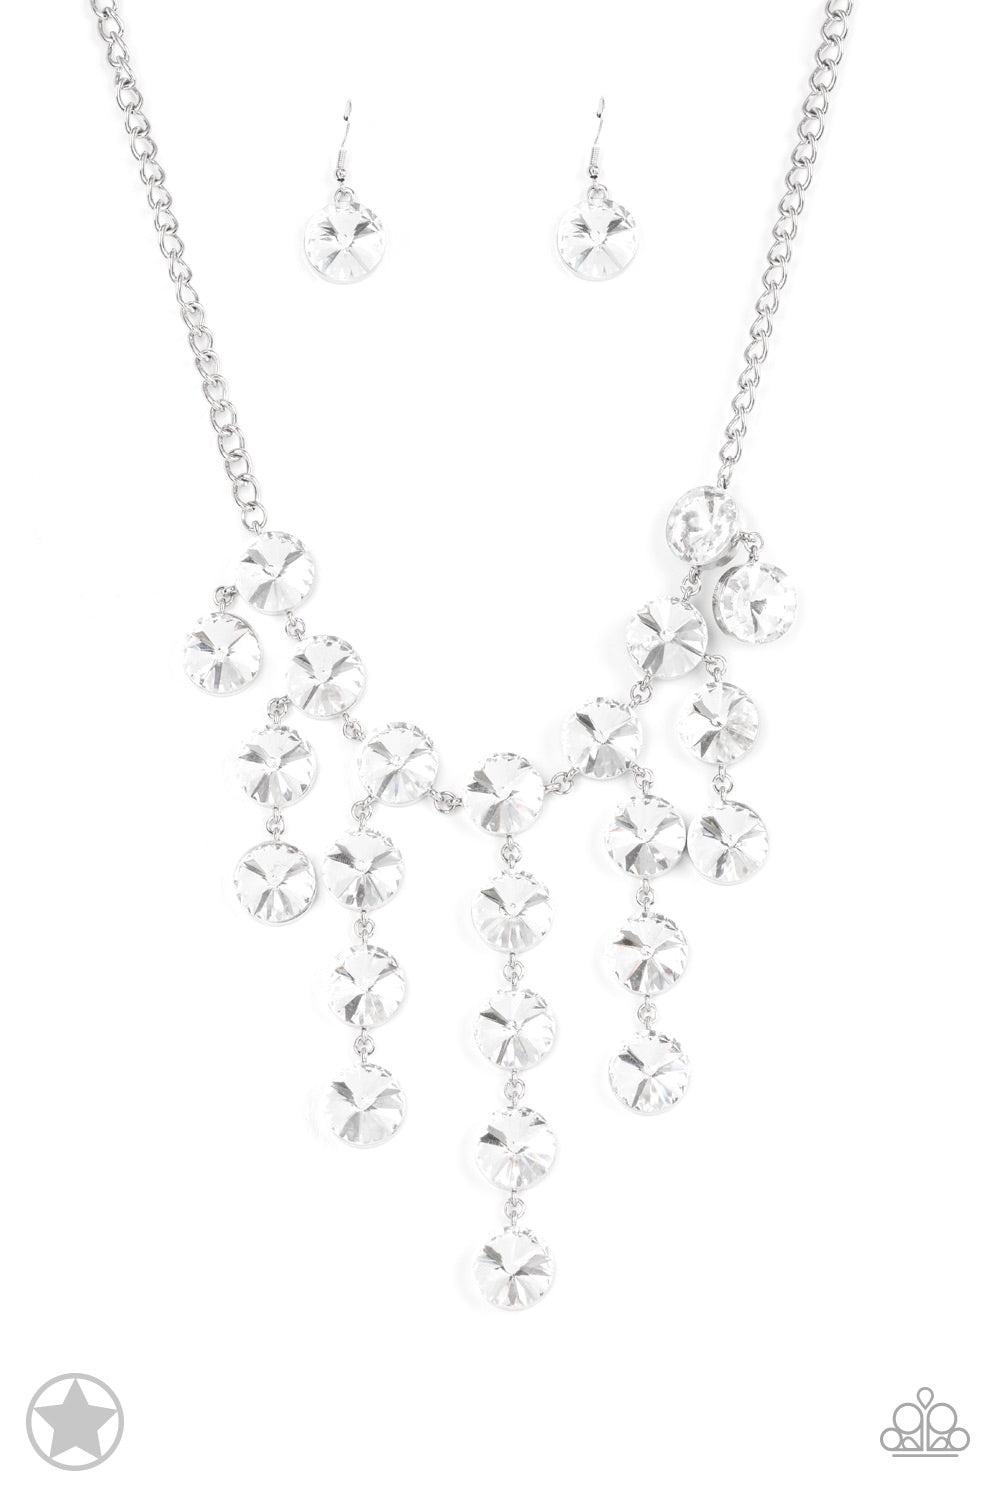 Paparazzi Jewelry & Accessories - Spotlight Stunner - Silver Necklace. Bling By Titia Boutique